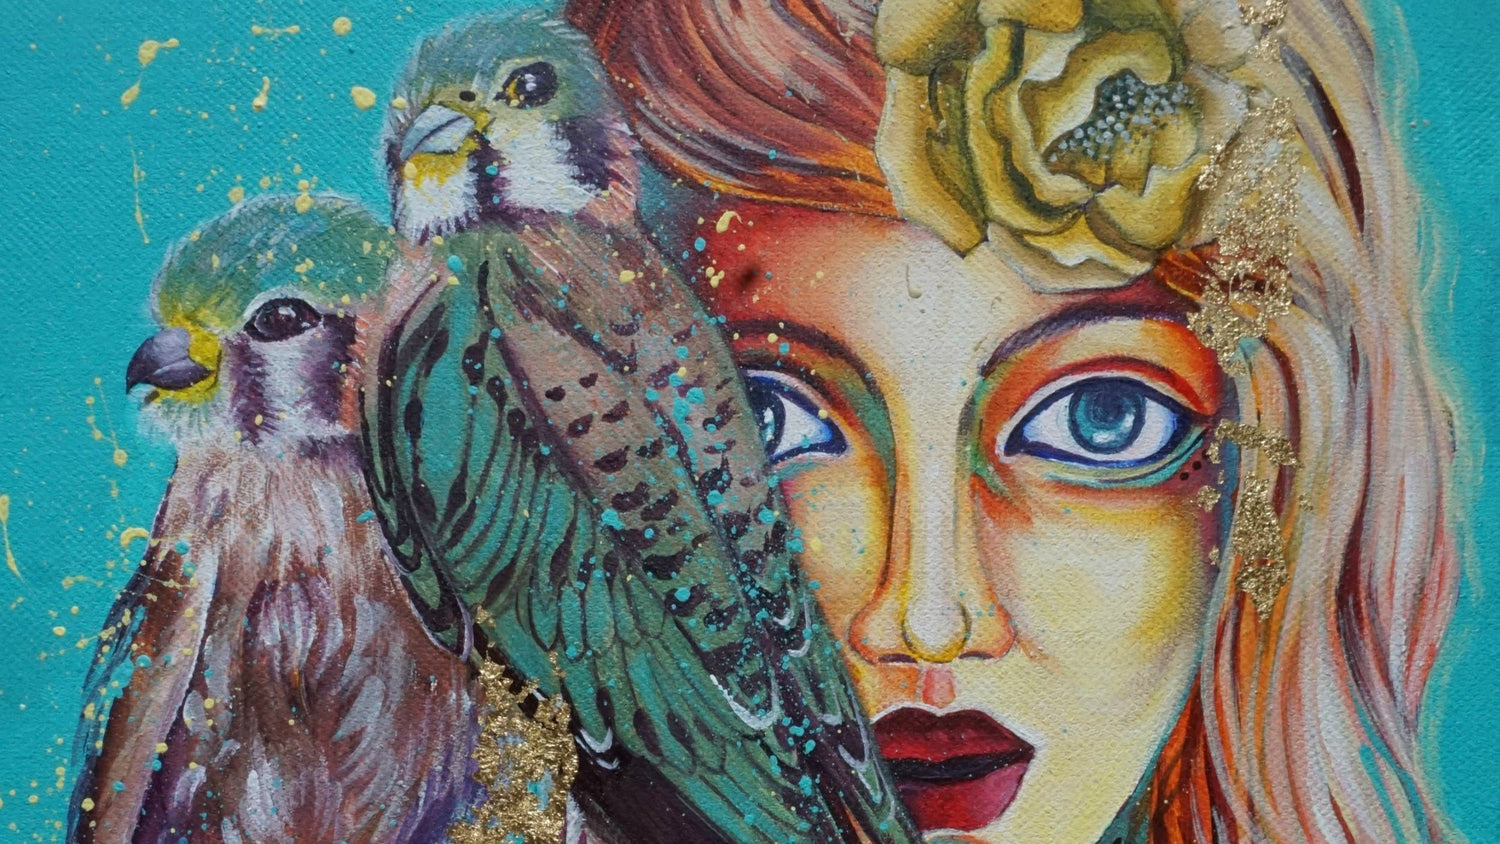 Discover the Art of Painting a Beautiful Girl with Two Birds - An Acrylic Workshop on Canvas for All Skill Levels!